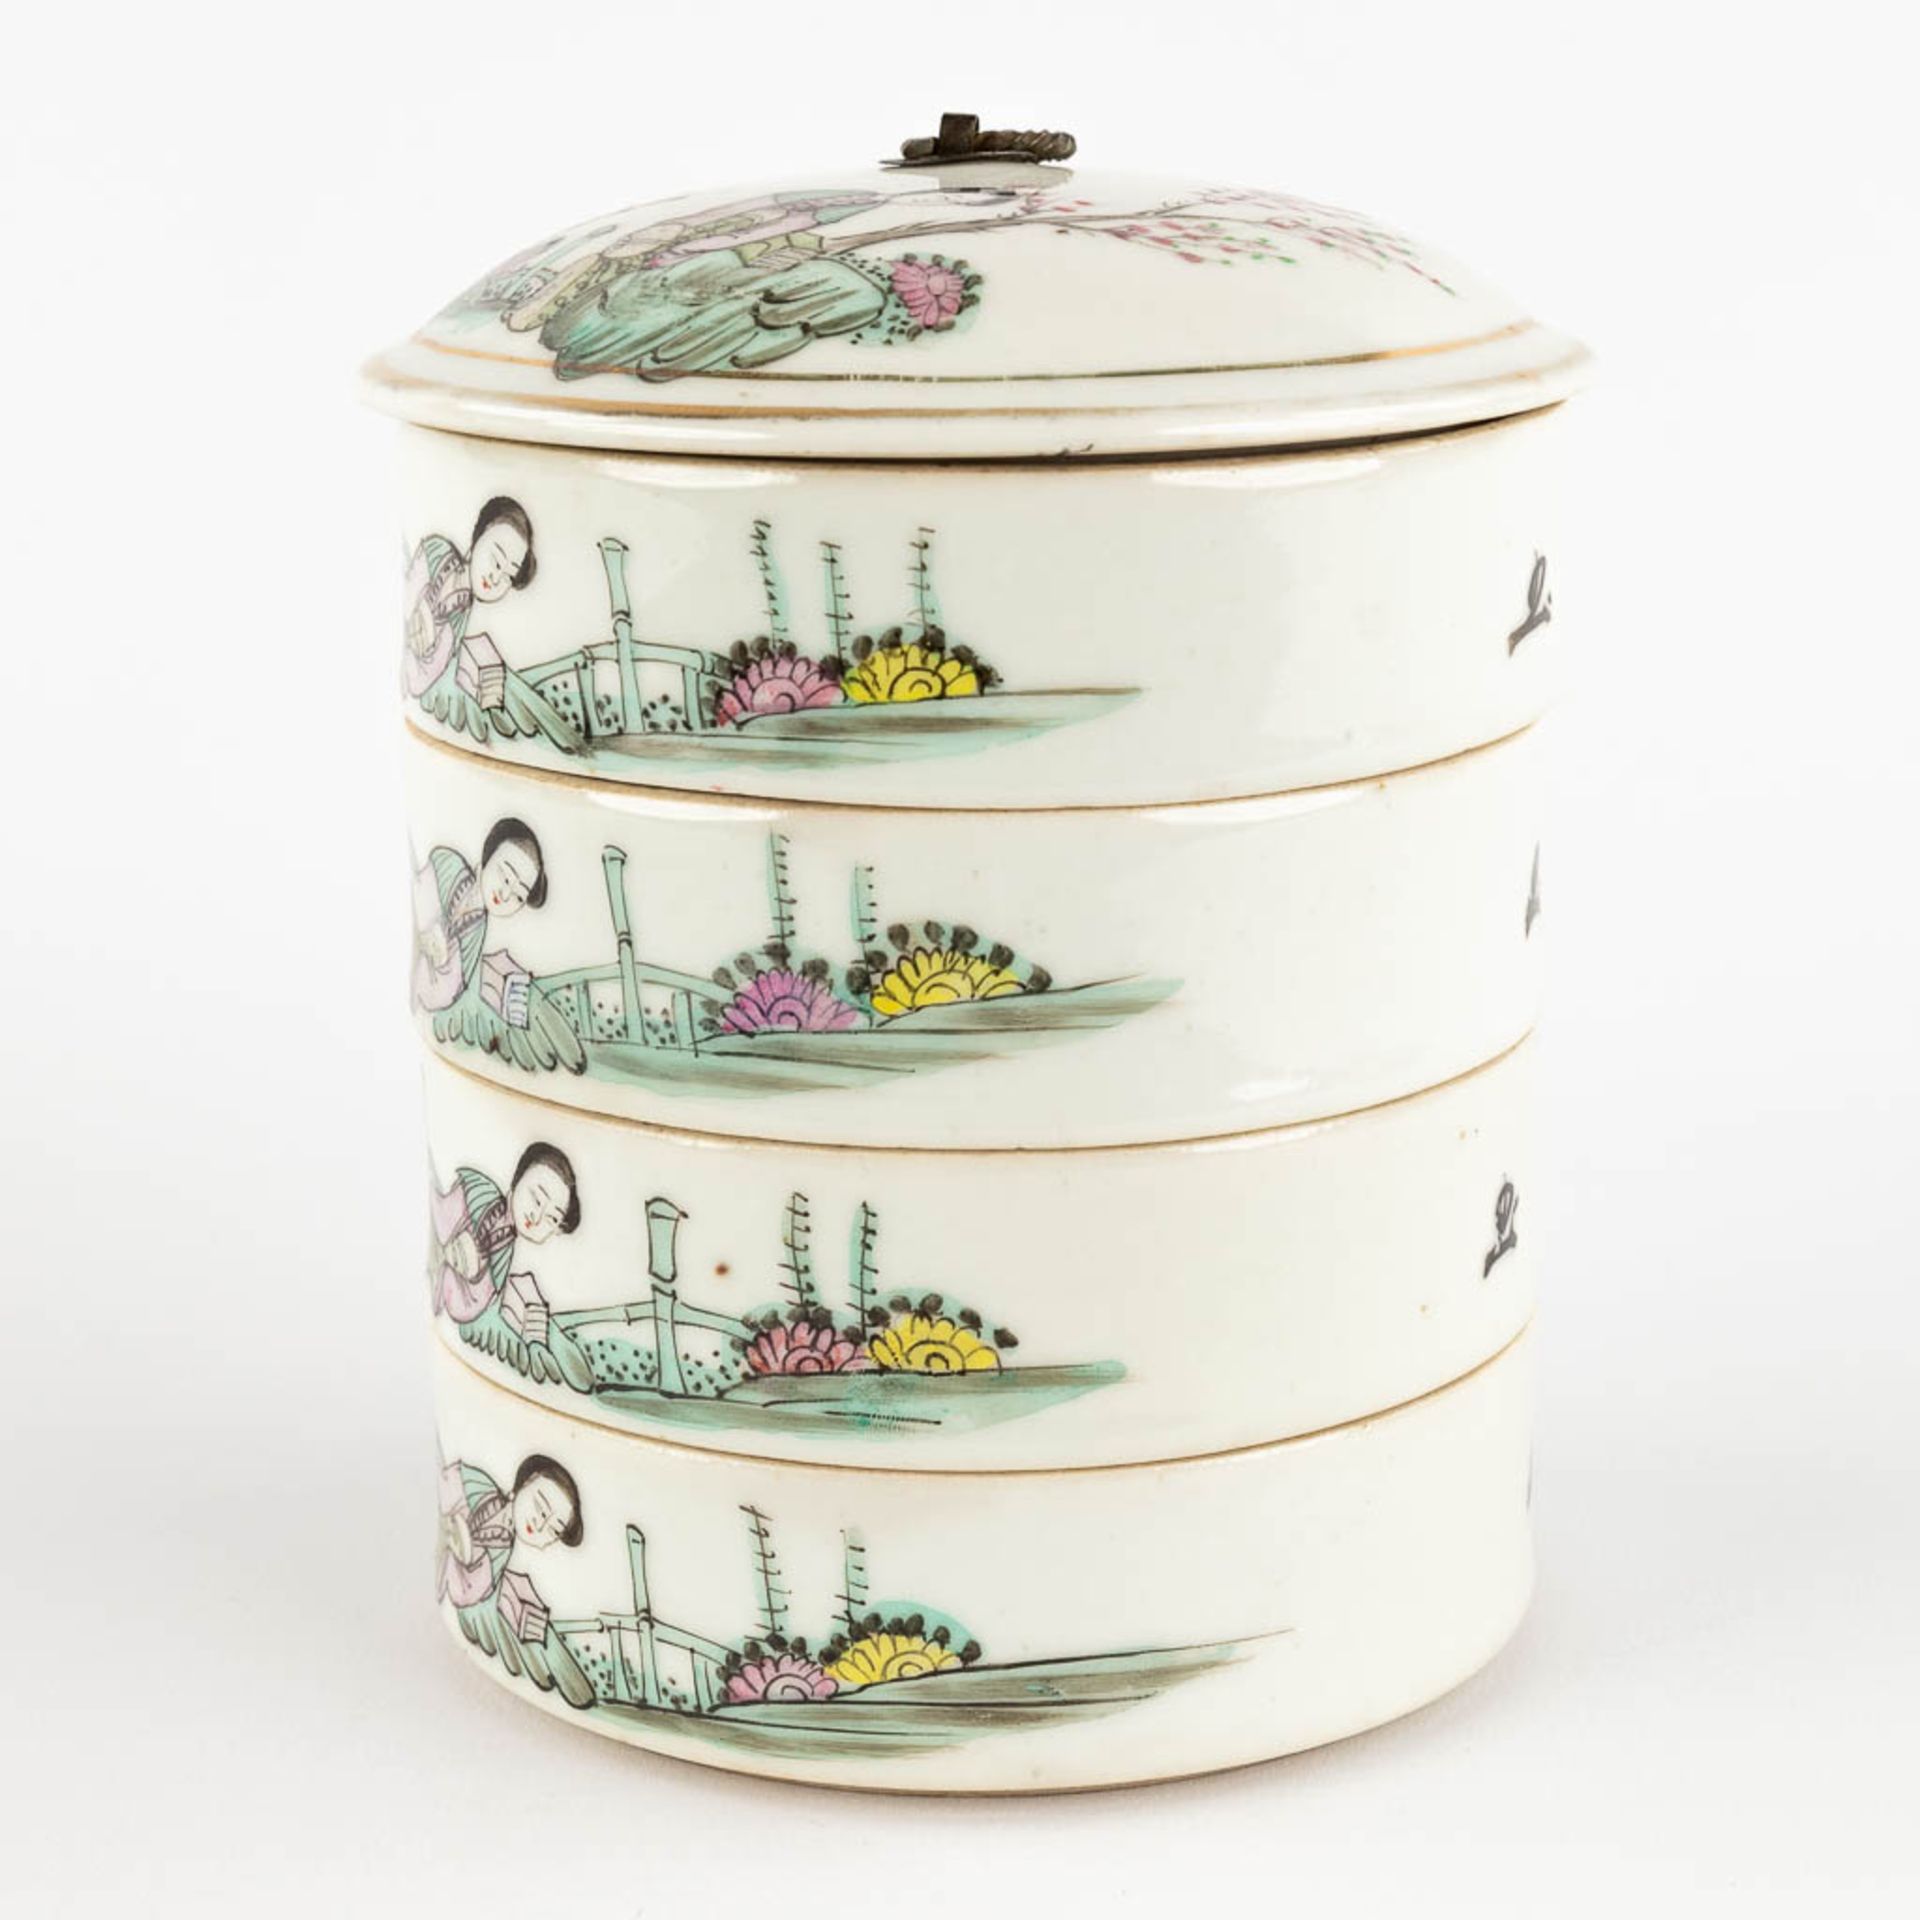 Four stackable Chinese storage pots, decorated with ladies, 19th/20th C. (H:15 x D:12 cm) - Image 7 of 12